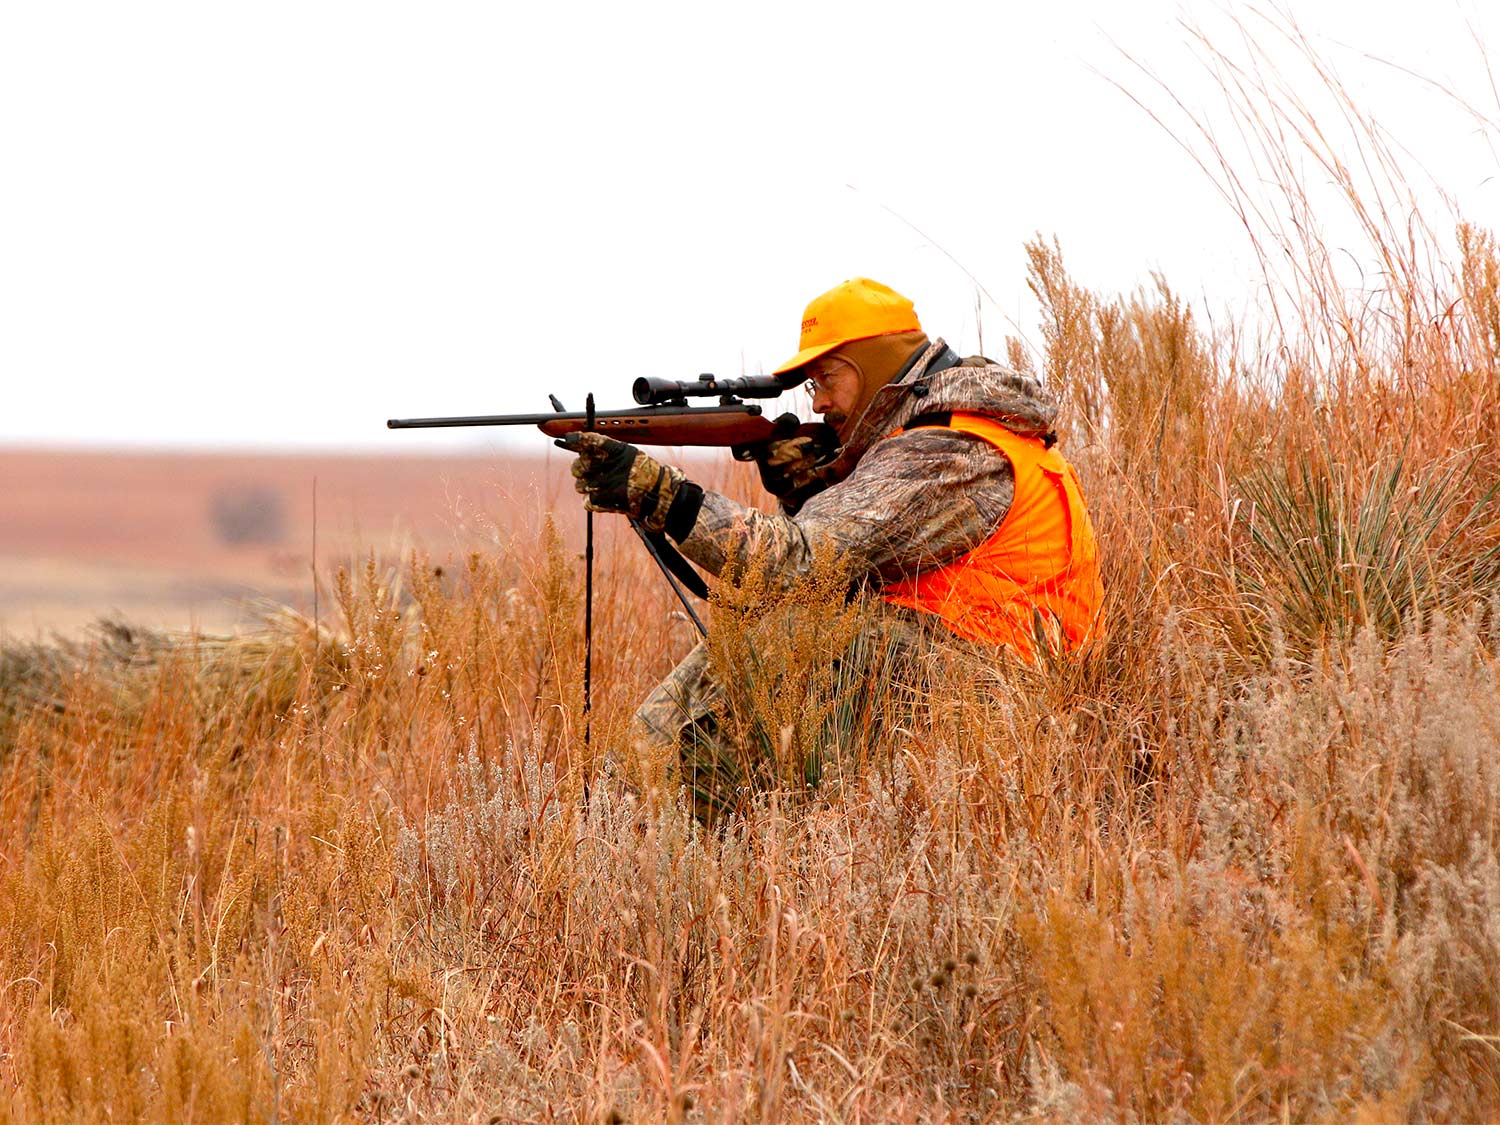 A hunter in camo and orange aims a rifle in a field.